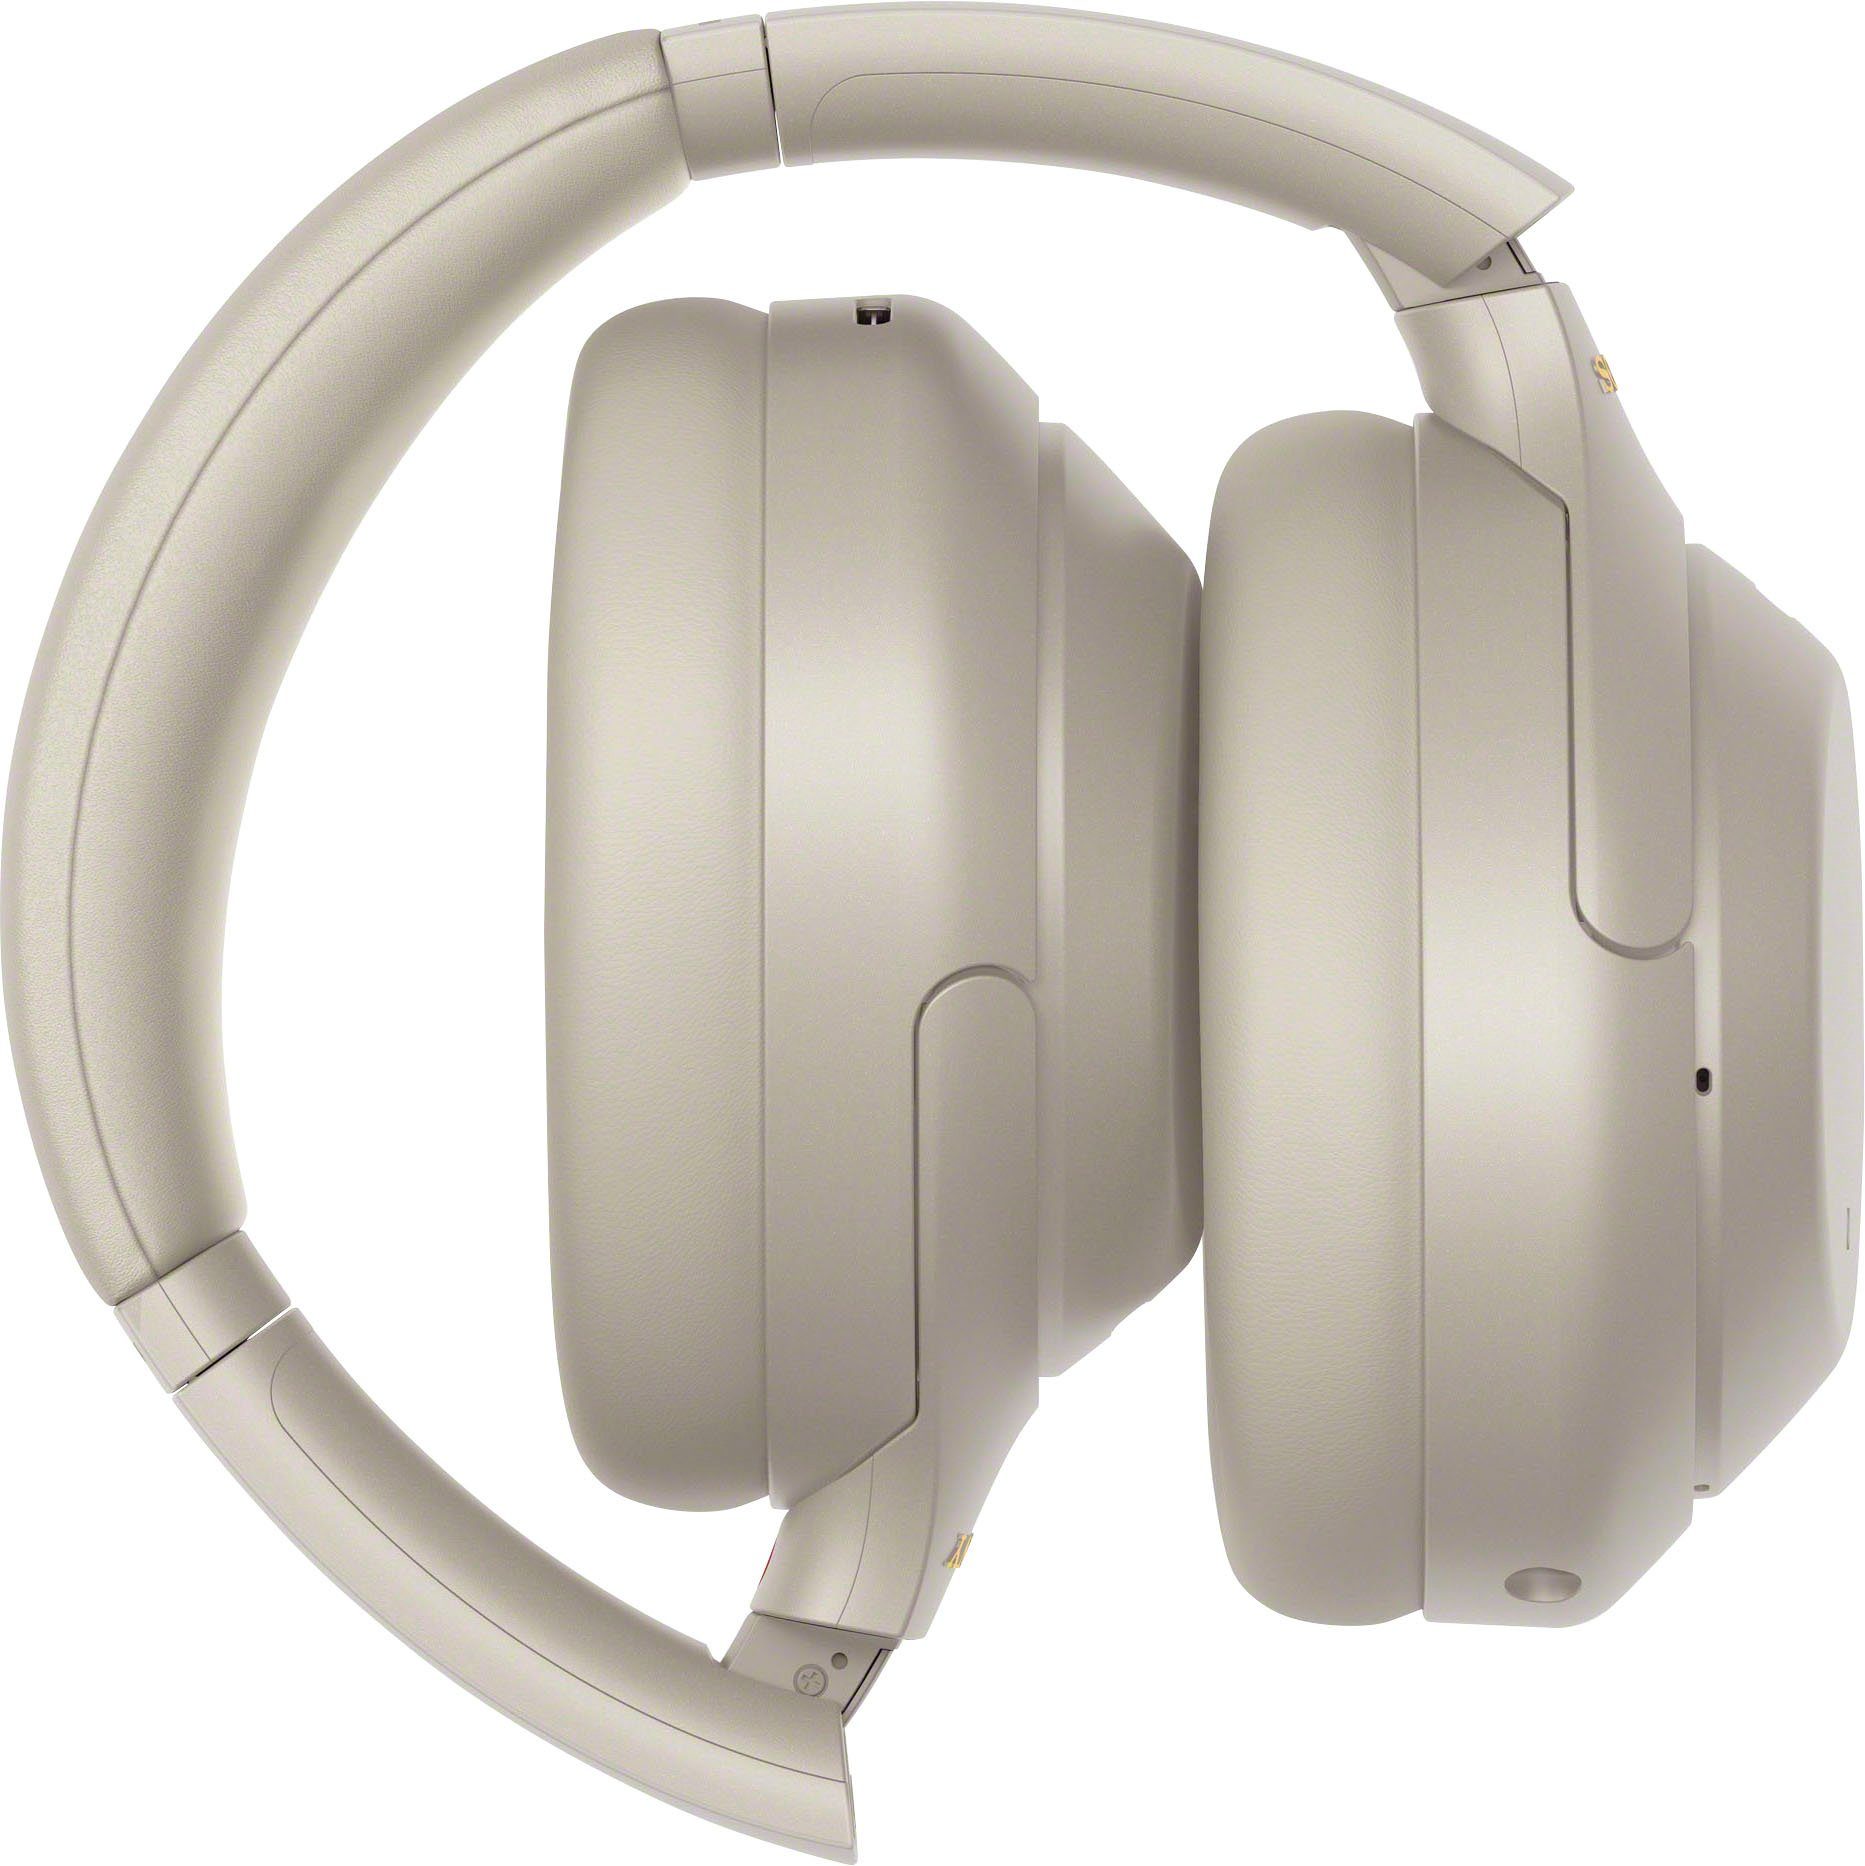 Sony Sensor, NFC, NFC, WH-1000XM4 (Noise-Cancelling, Touch Verbindung via Silber Bluetooth, One-Touch Over-Ear-Kopfhörer kabelloser Schnellladefunktion)